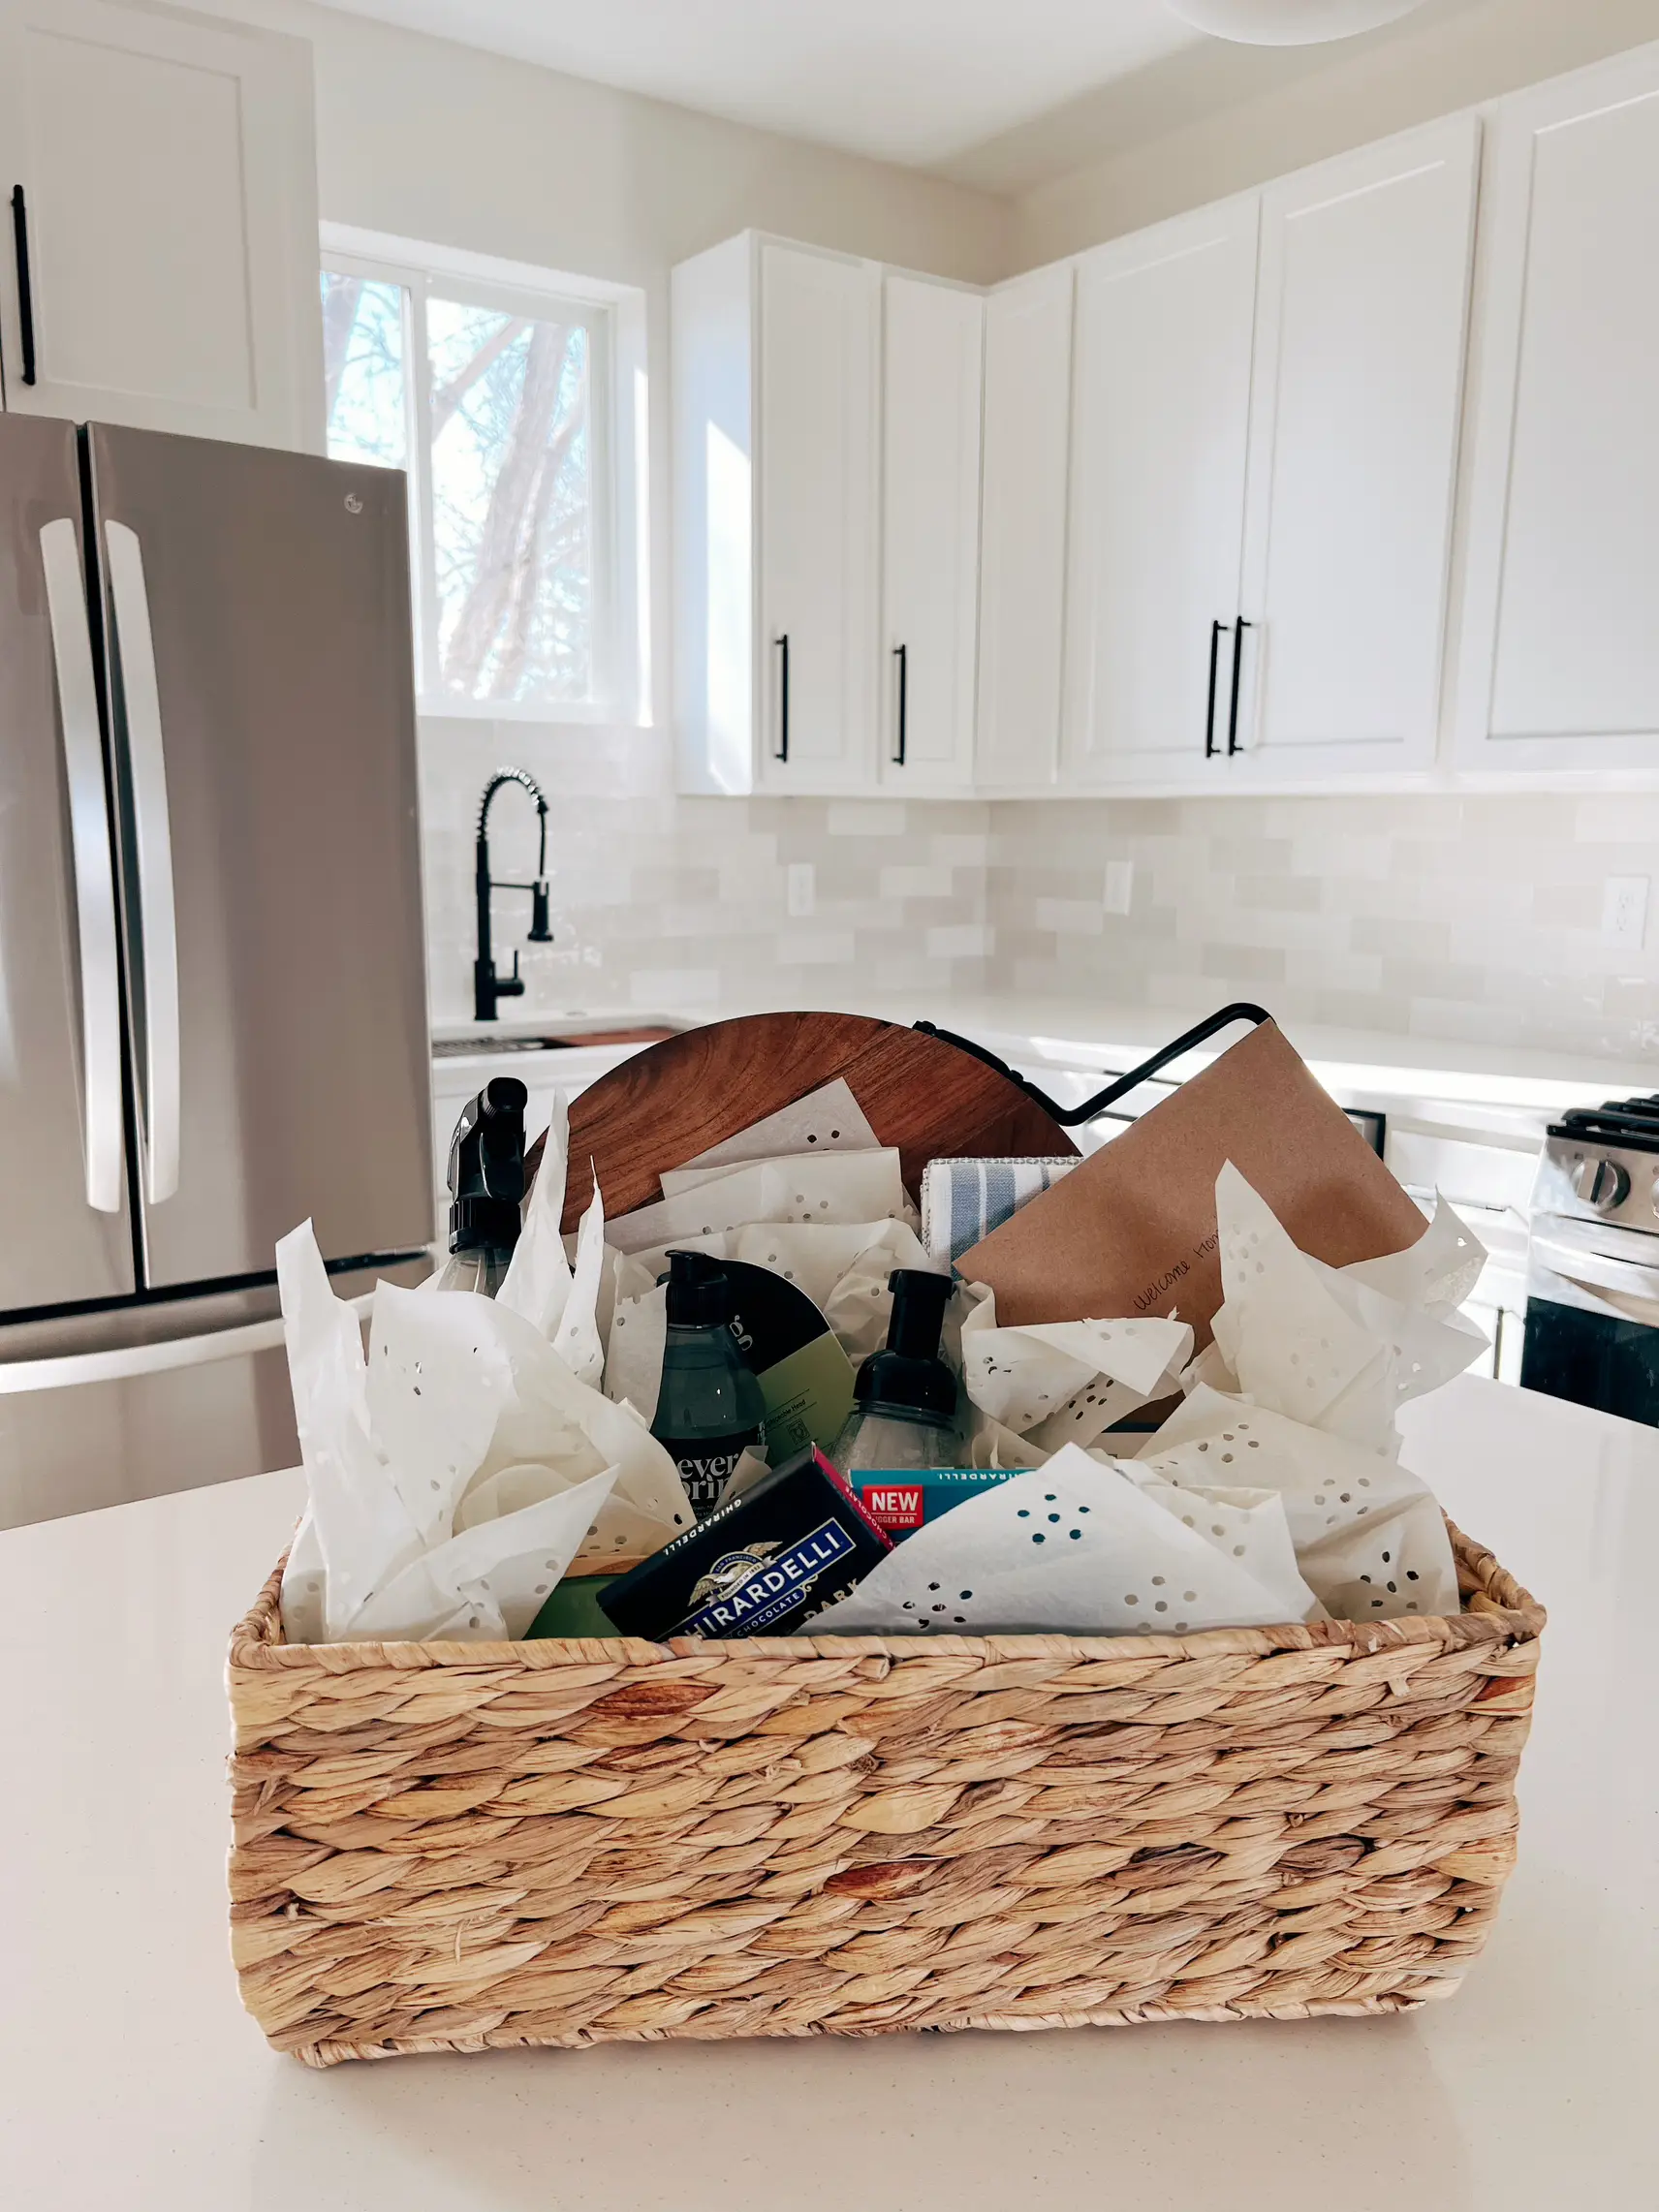 Housewarming Gift Basket Ideas for Every Room in the Home